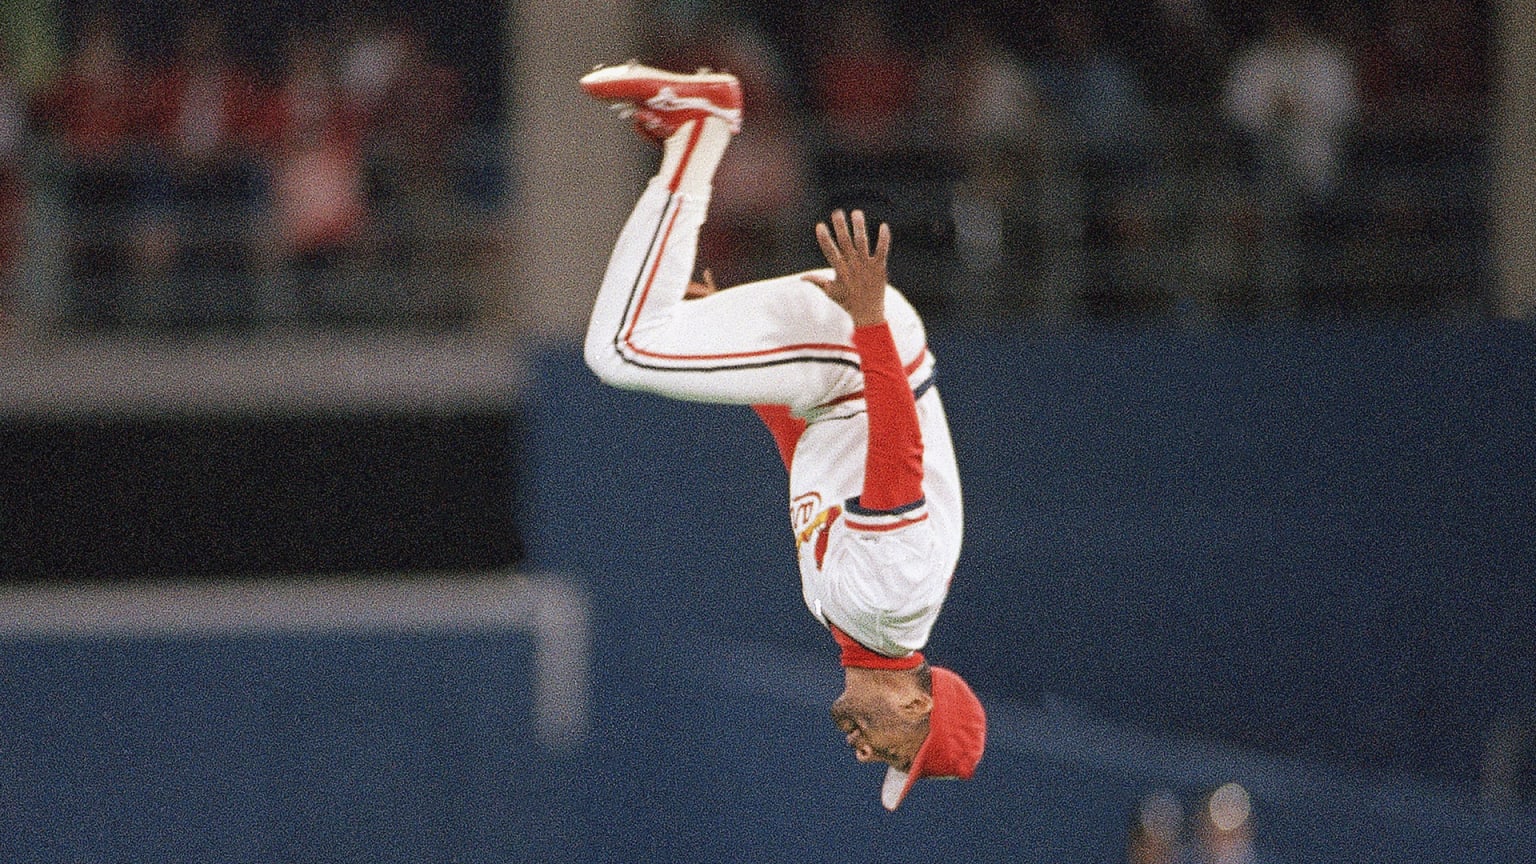 A photo of Ozzie Smith upside down in midair during one of his patented backflips